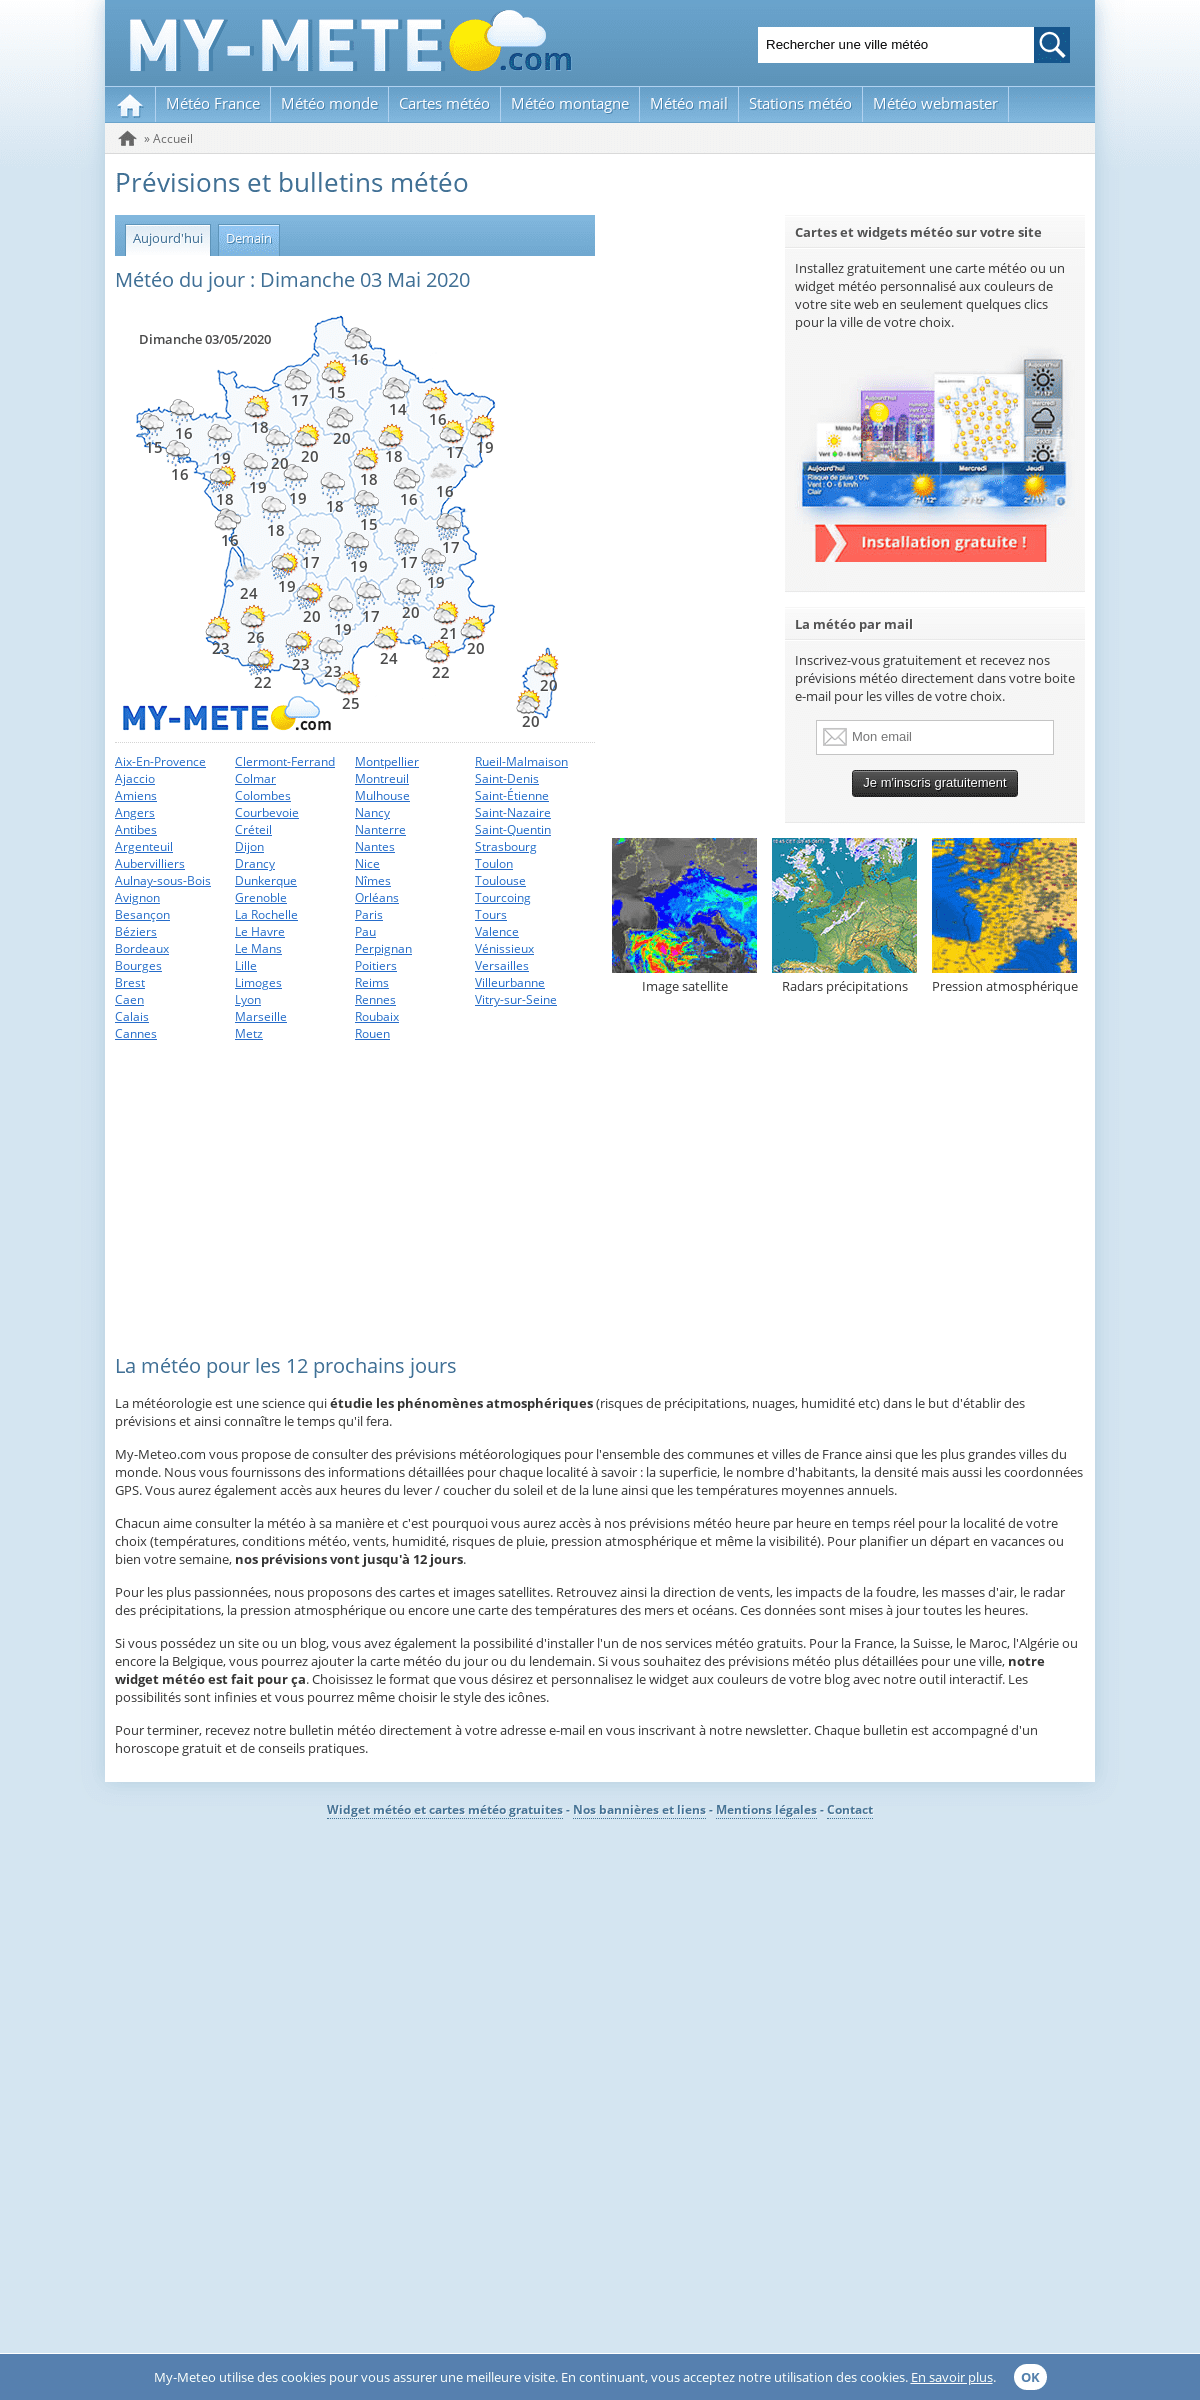 A complete backup of my-meteo.fr